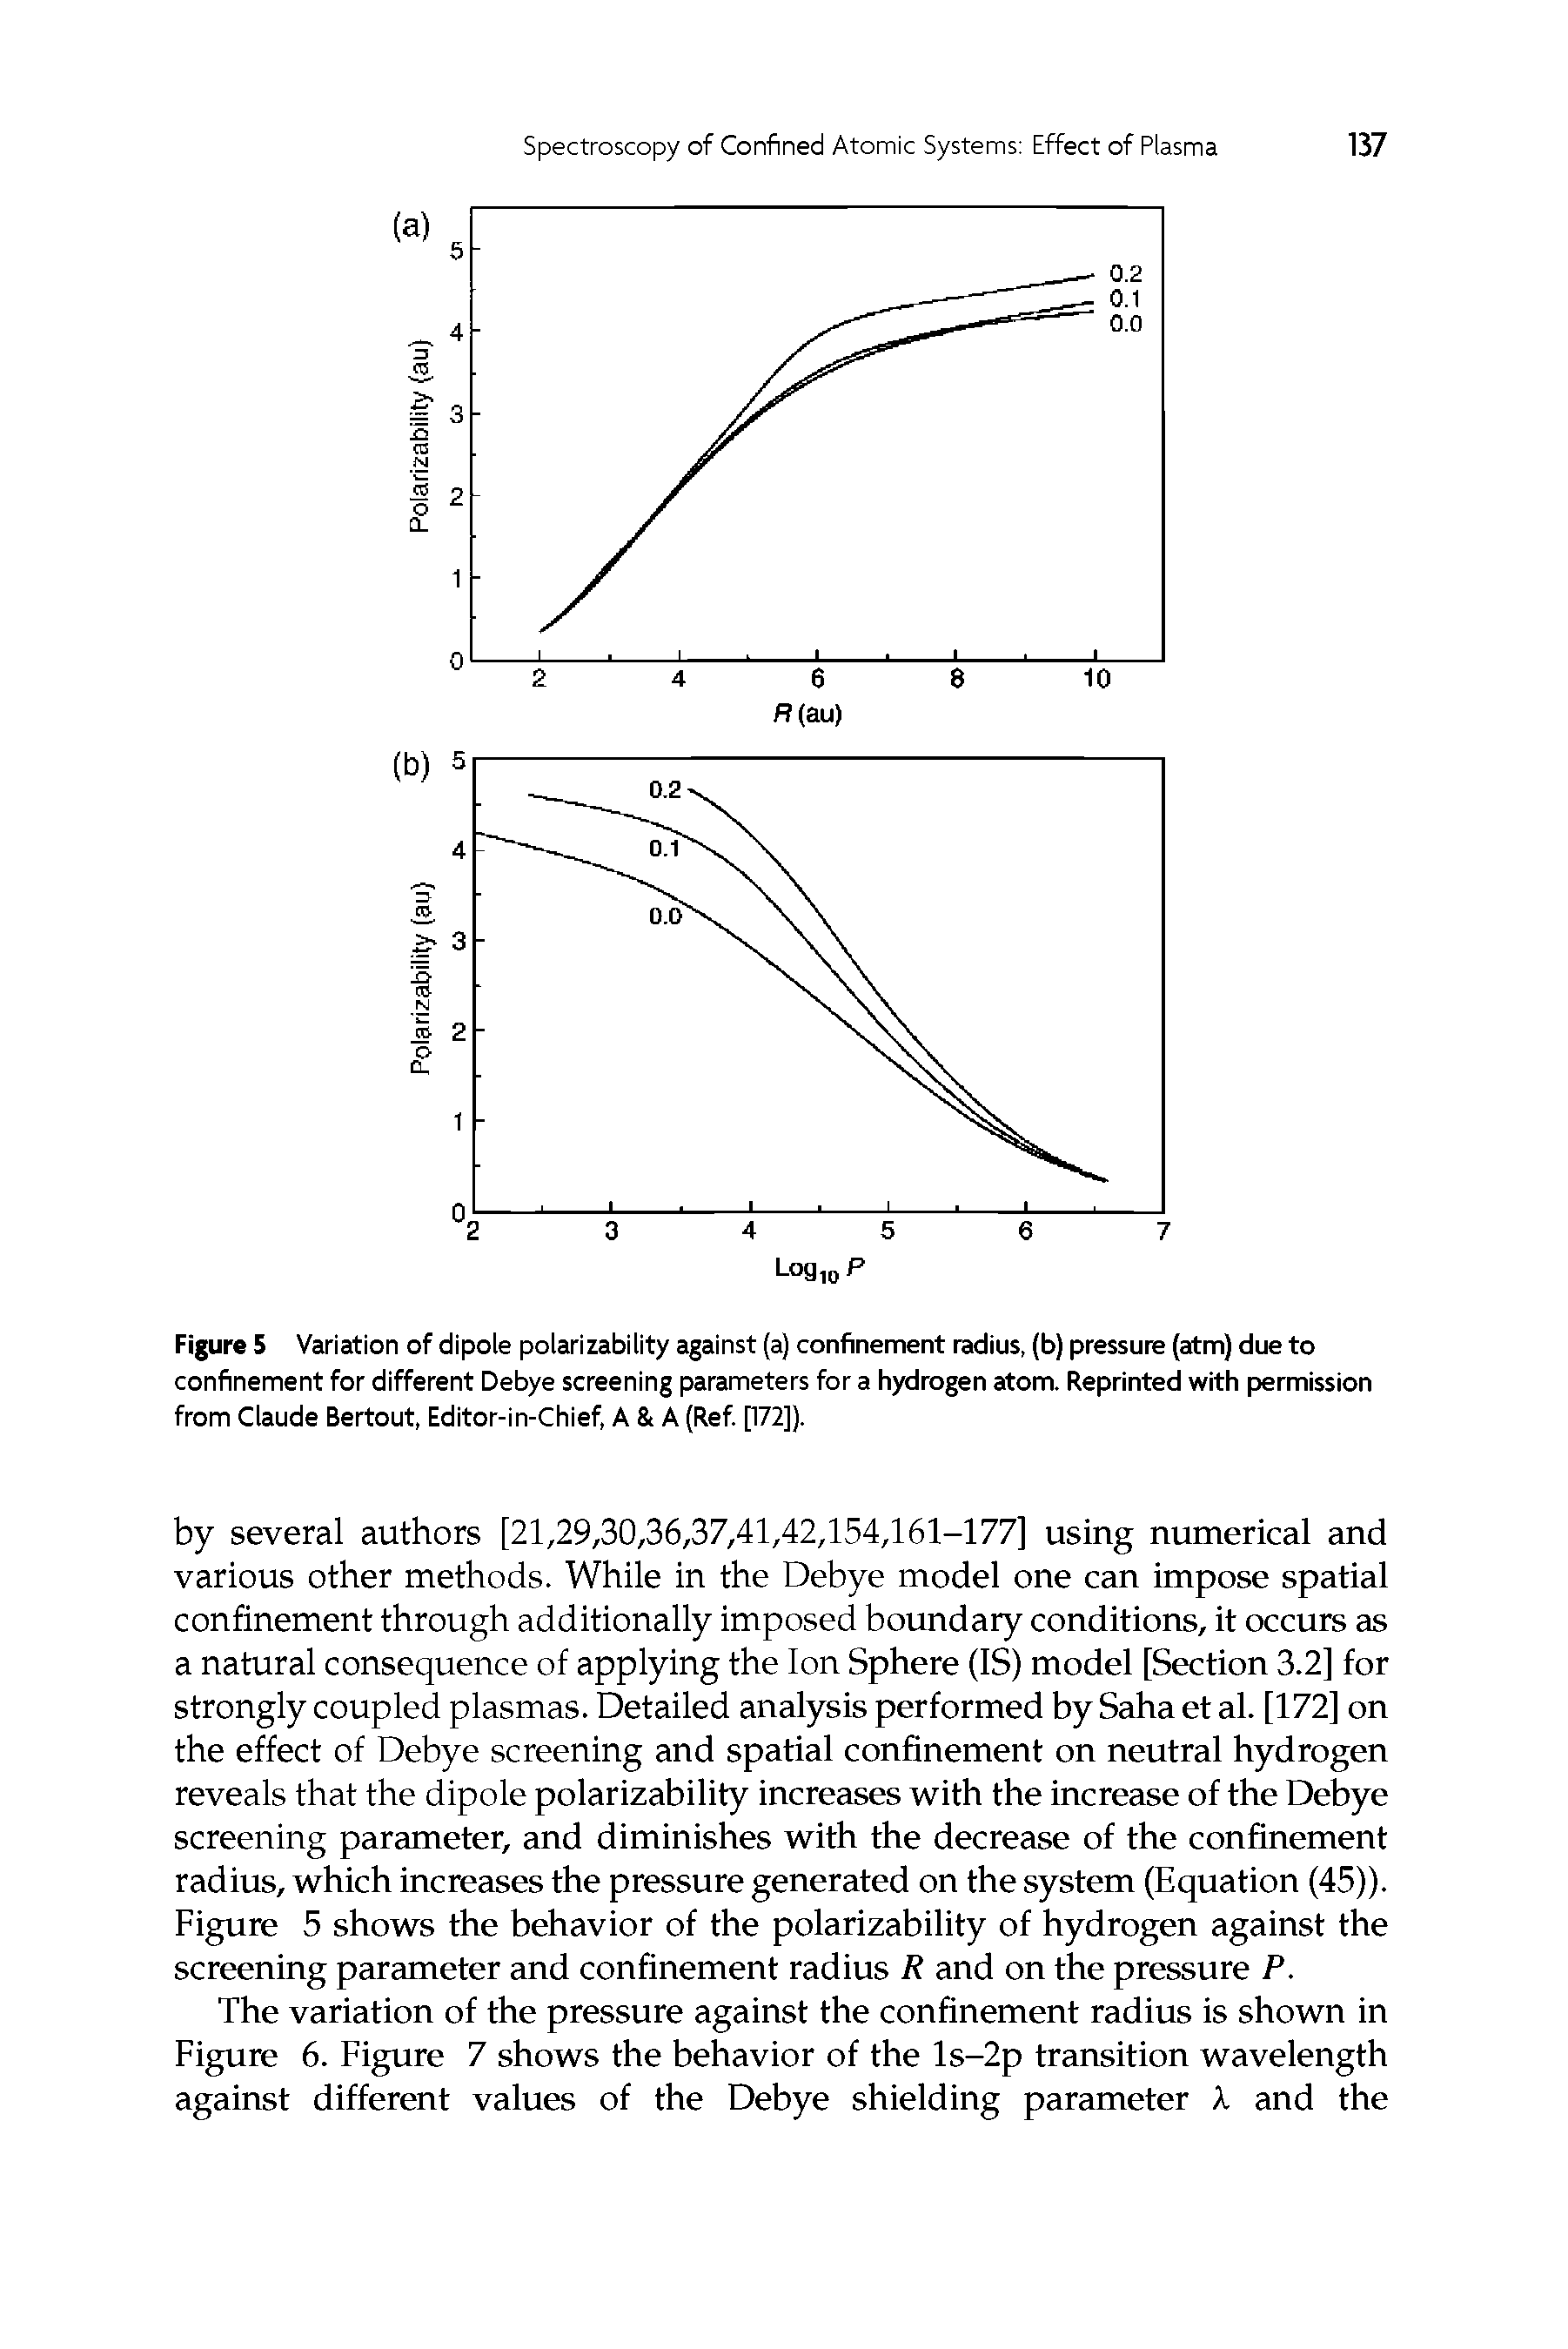 Figure 5 Variation of dipole polarizability against (a) confinement radius, (b) pressure (atm) due to confinement for different Debye screening parameters for a hydrogen atom. Reprinted with permission from Claude Bertout, Editor-in-Chief, A A (Ref. [172]).